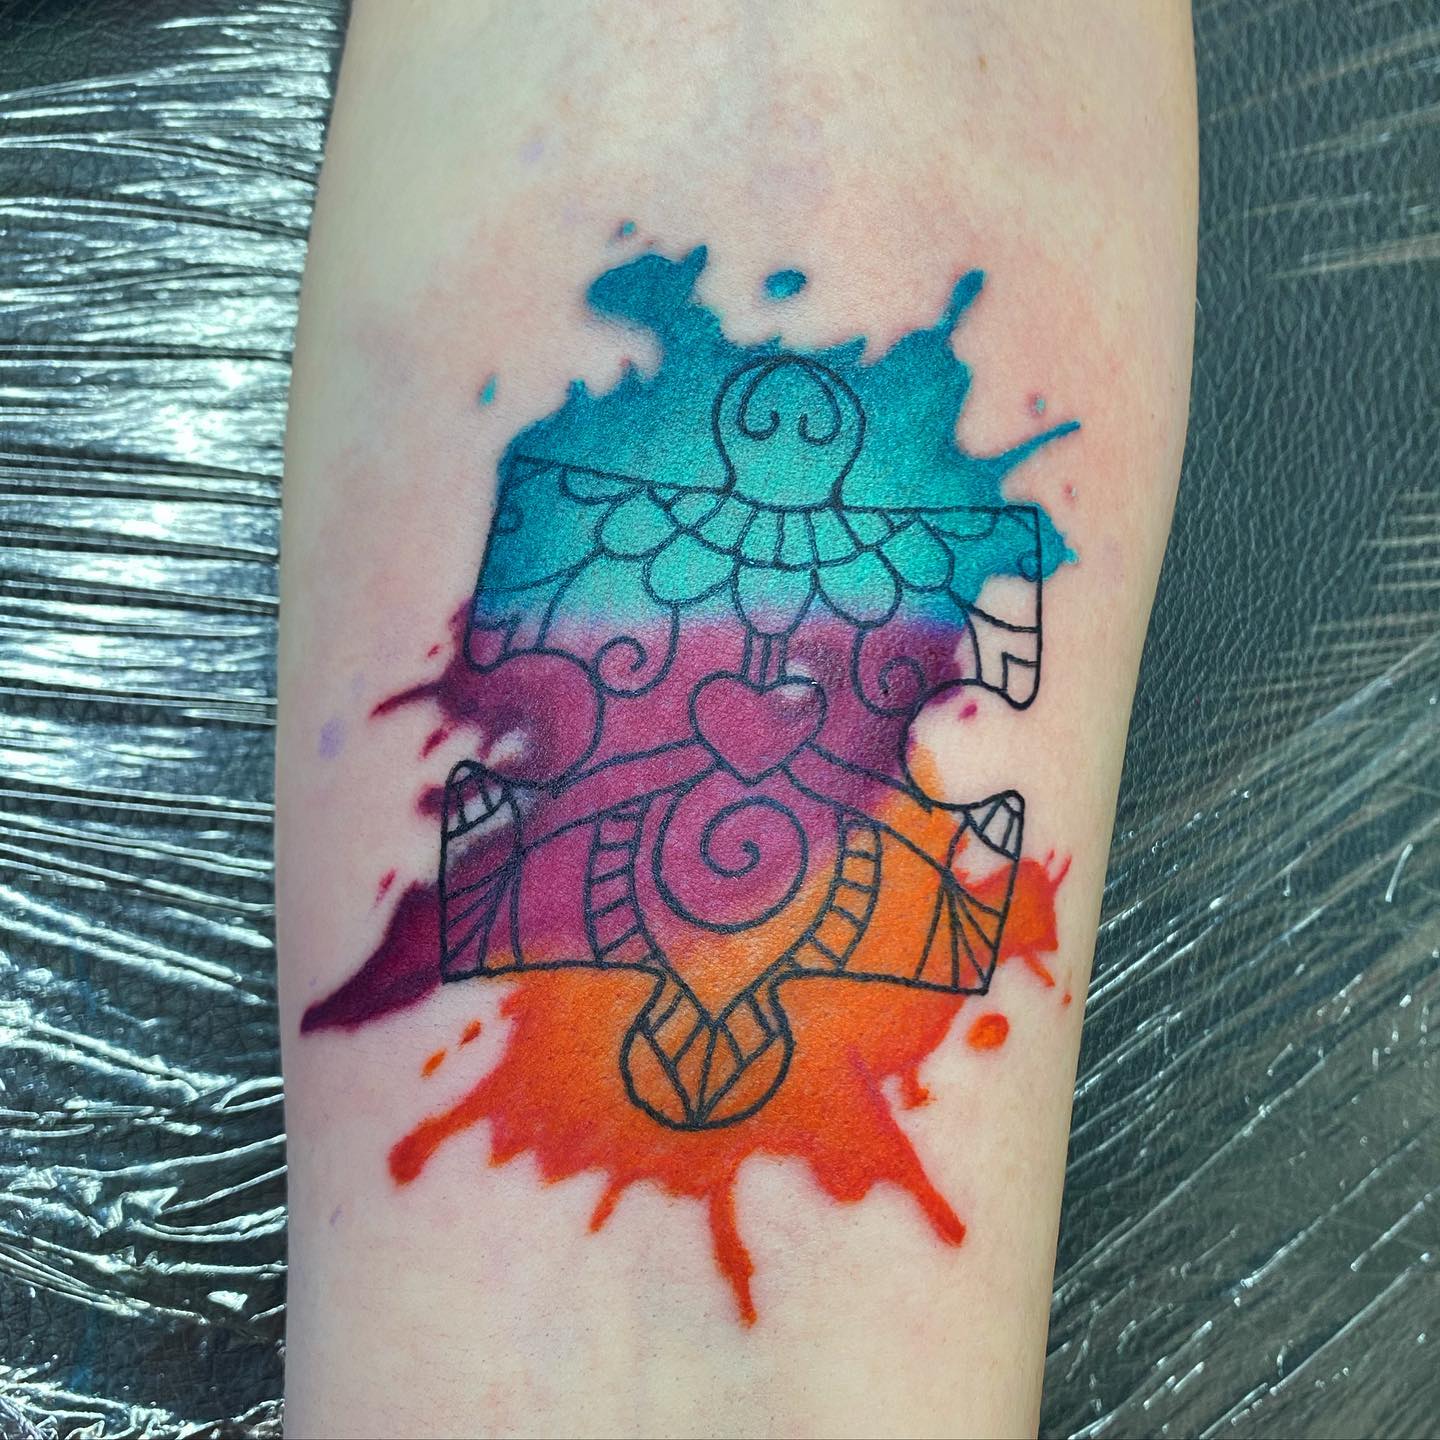 A splash of color and this loud tattoo is the right representation of how things can look in someone’s head, especially if they have autism.